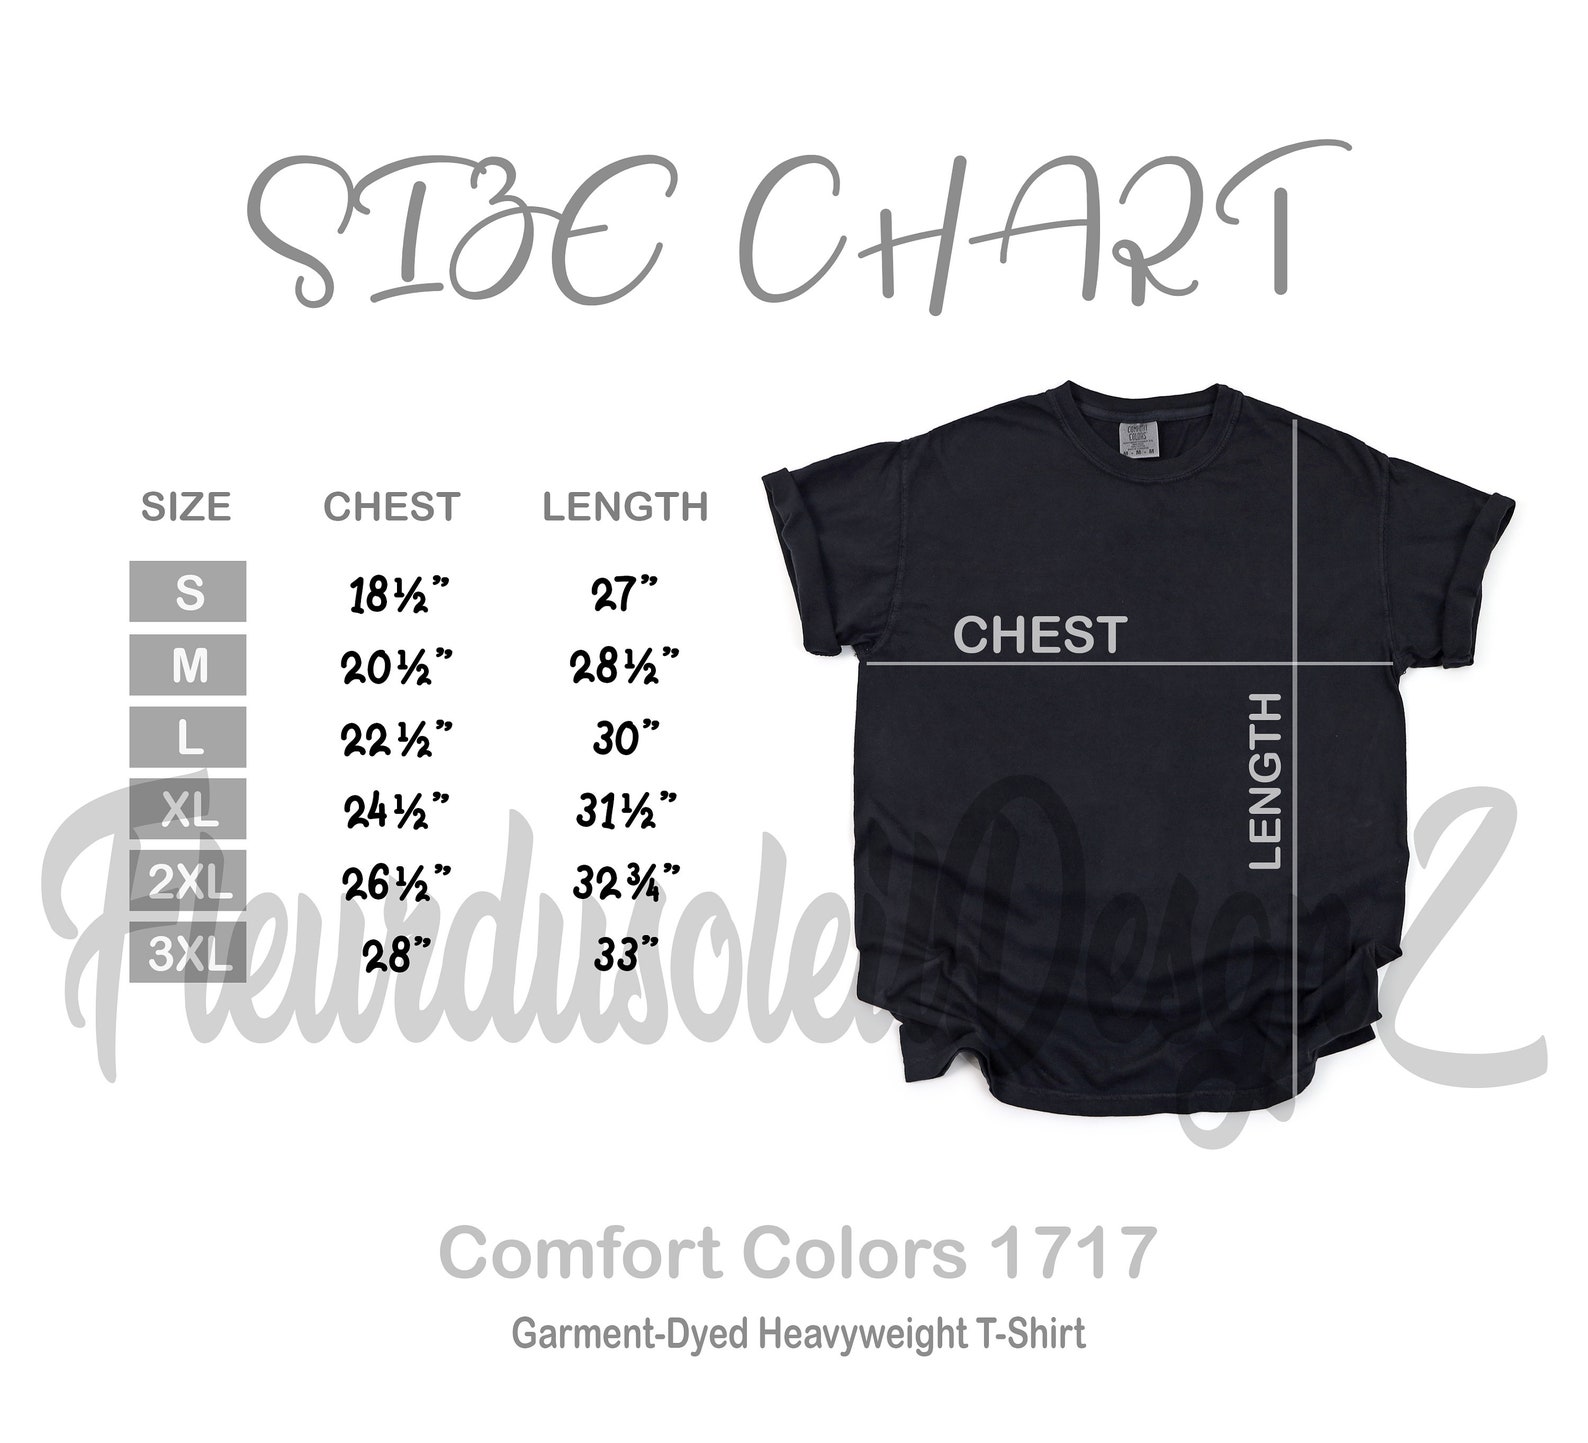 Comfort Colors 1717 Size Chart for Comfort Colors 1717 | Etsy